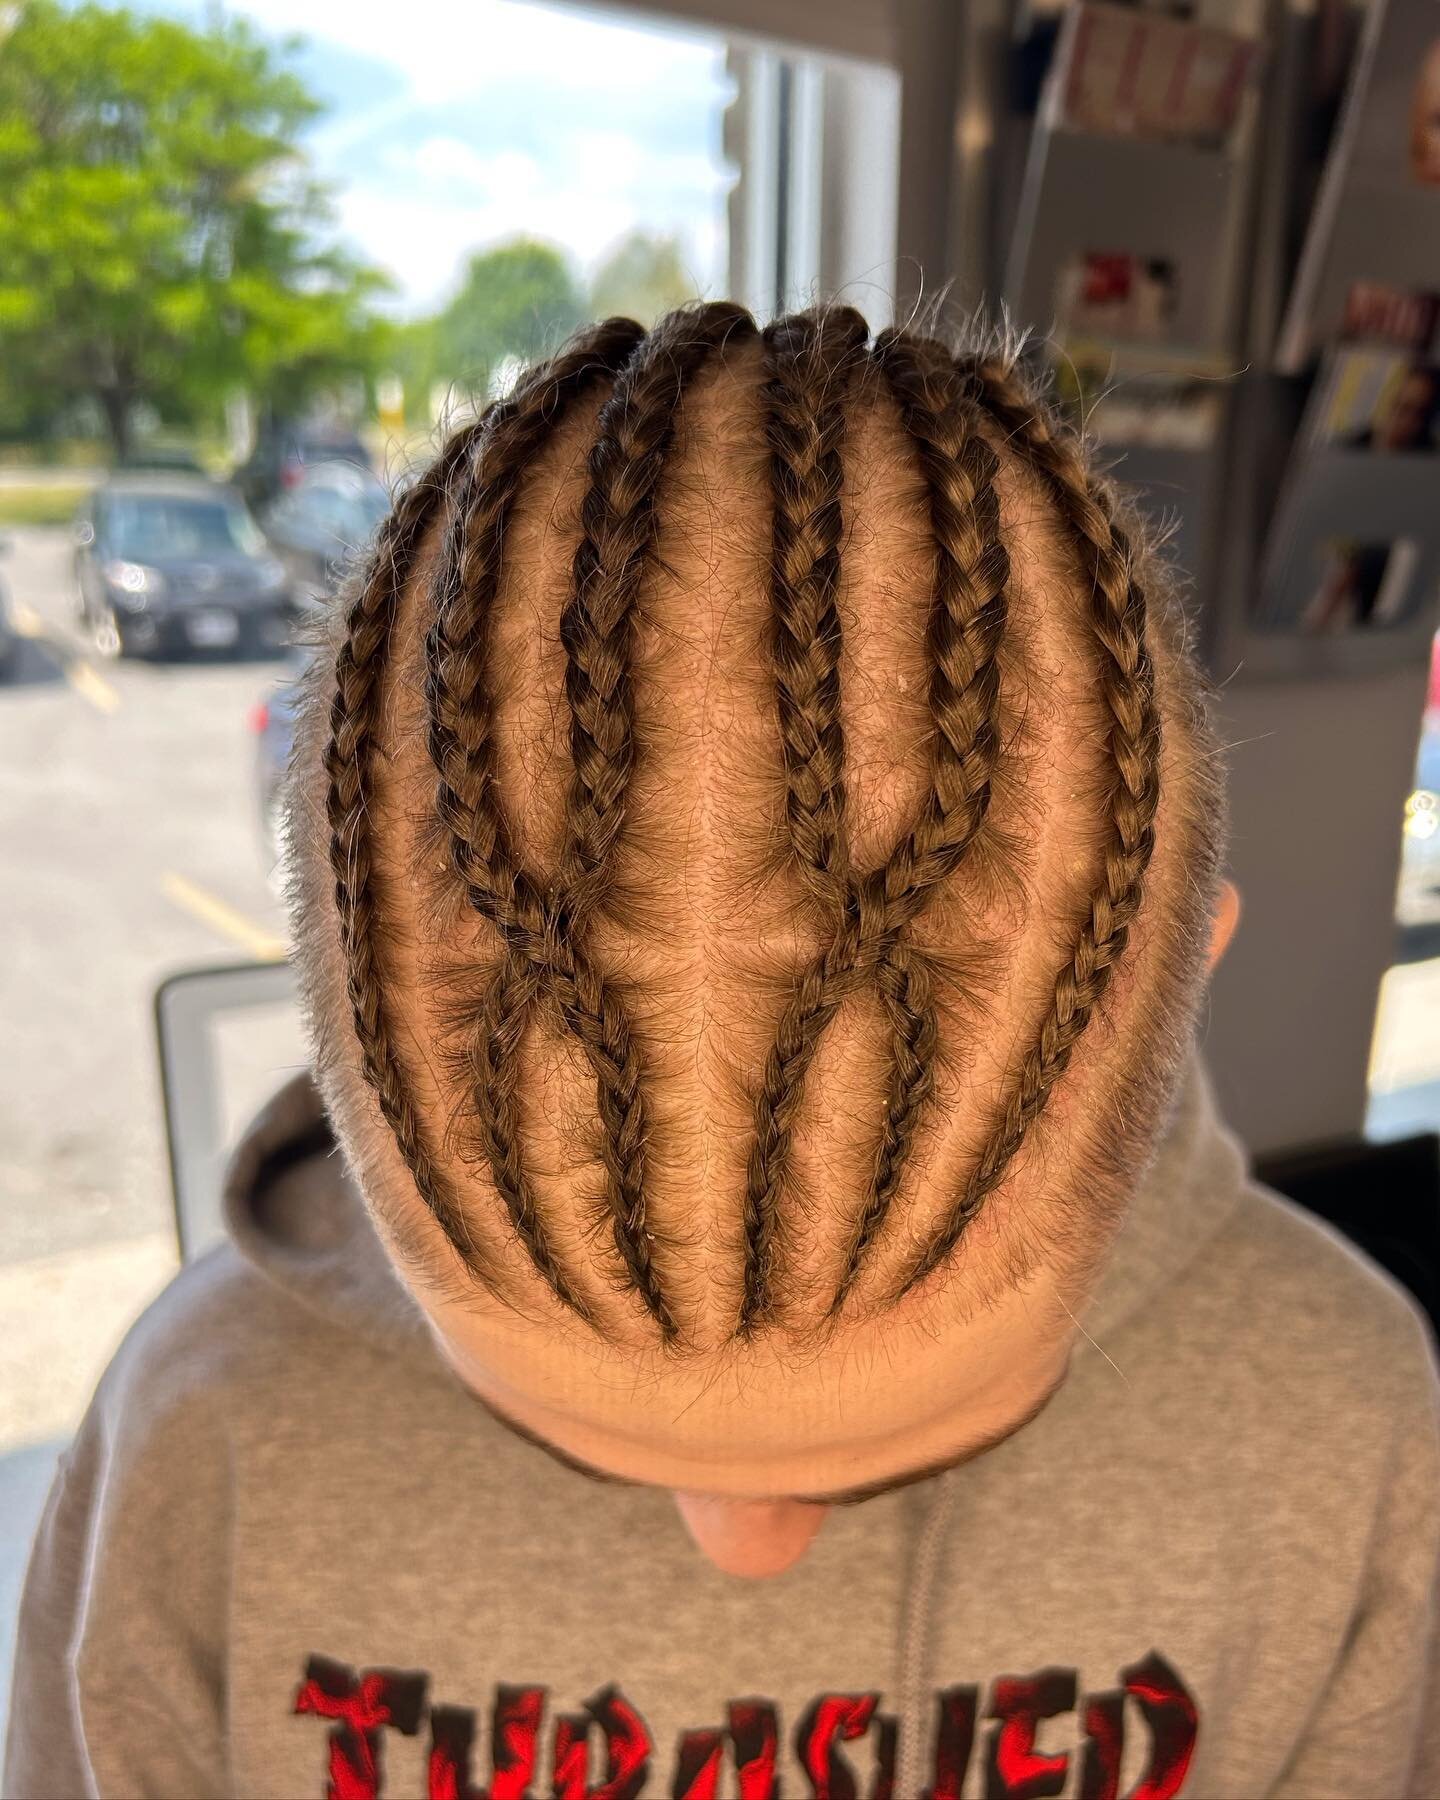 SUMMER BRAIDS!

We are proud to announce that Master Johns is now offering braiding, twisting and detangling services for our clients. Book your appointment now with one of our trained stylists!

We recently had a workshop with Princess, a master in 